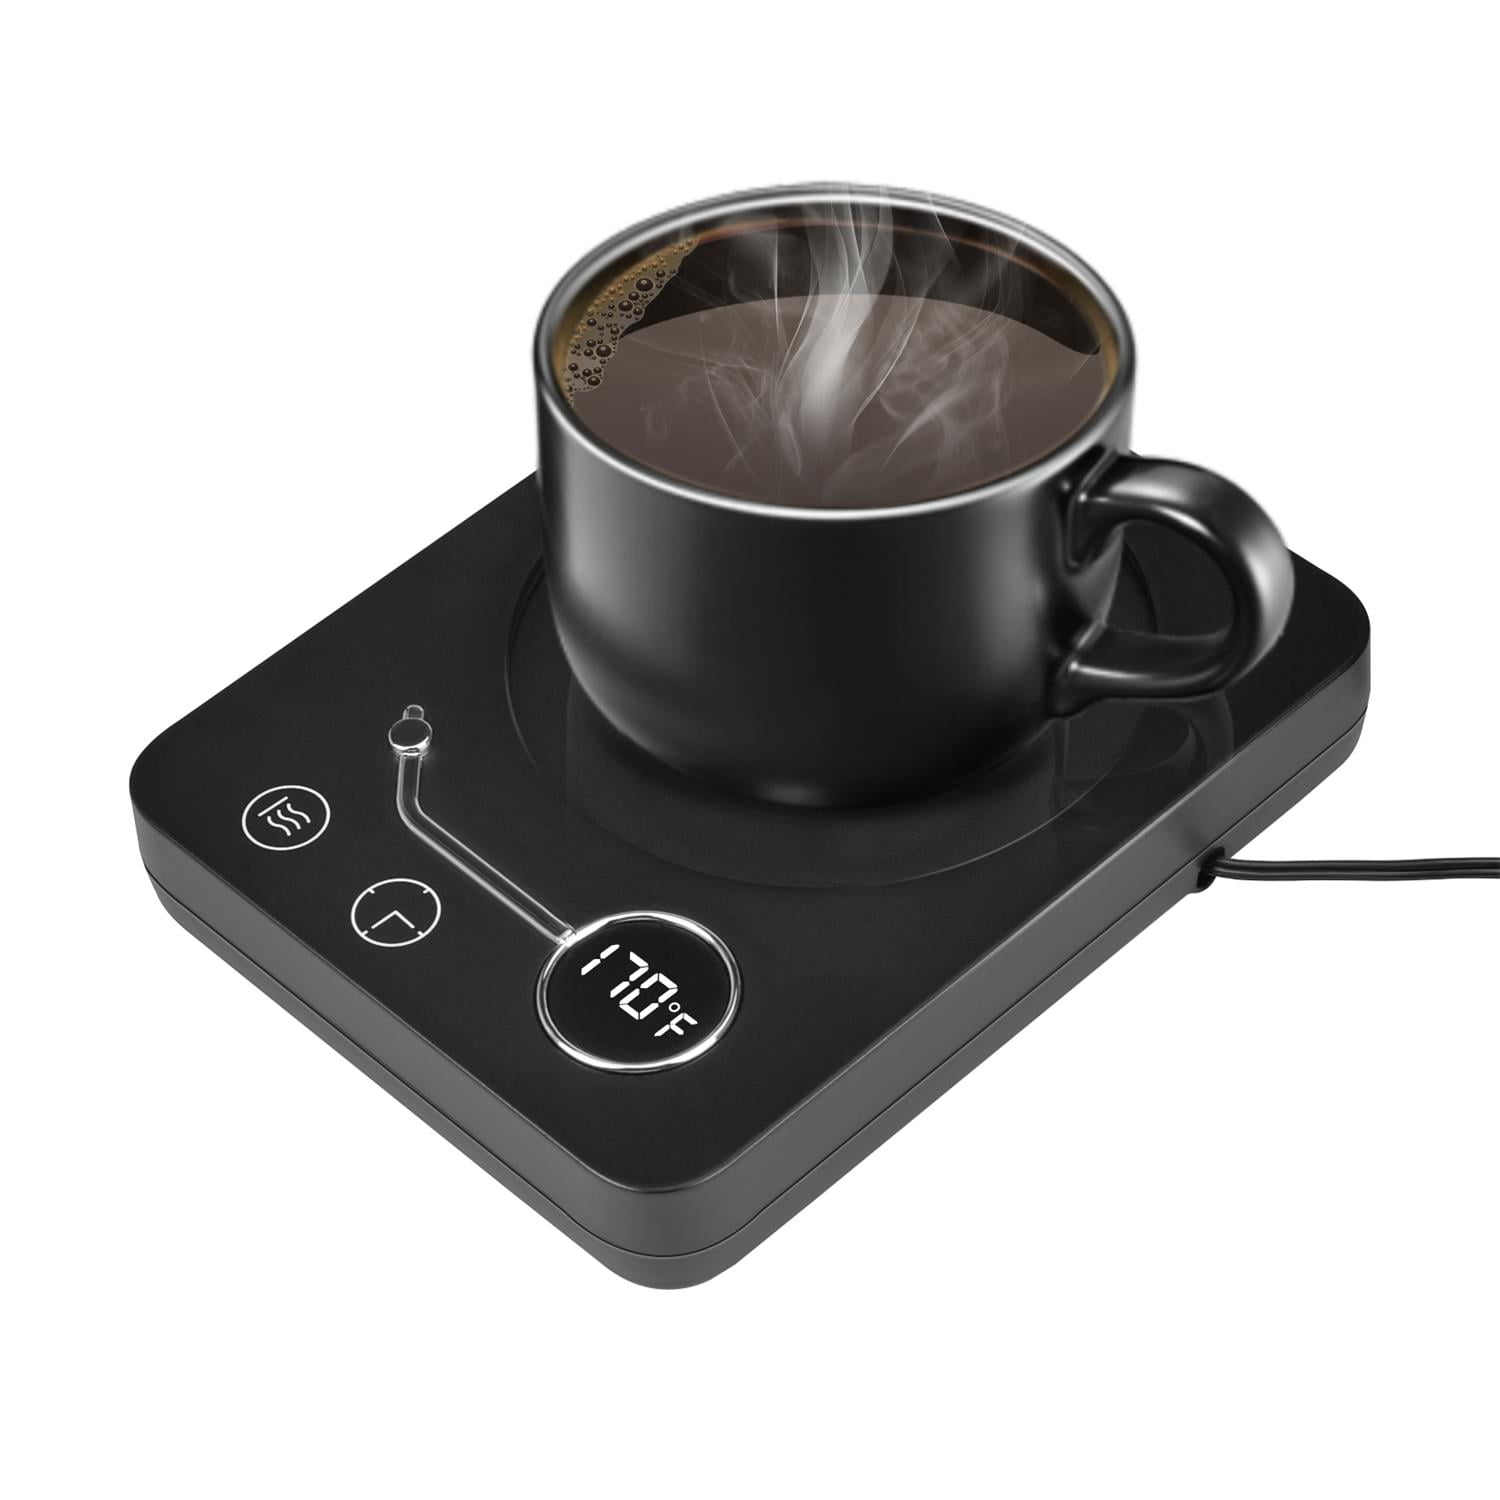 Coffee Mug Warmer - Coffee Warmer for Desk 2-12 Hrs Timer Auto Shut Off -  Electric Cup Warmer with 3-Temperature Settings (Up to 170℉/75°C) -  Beverage